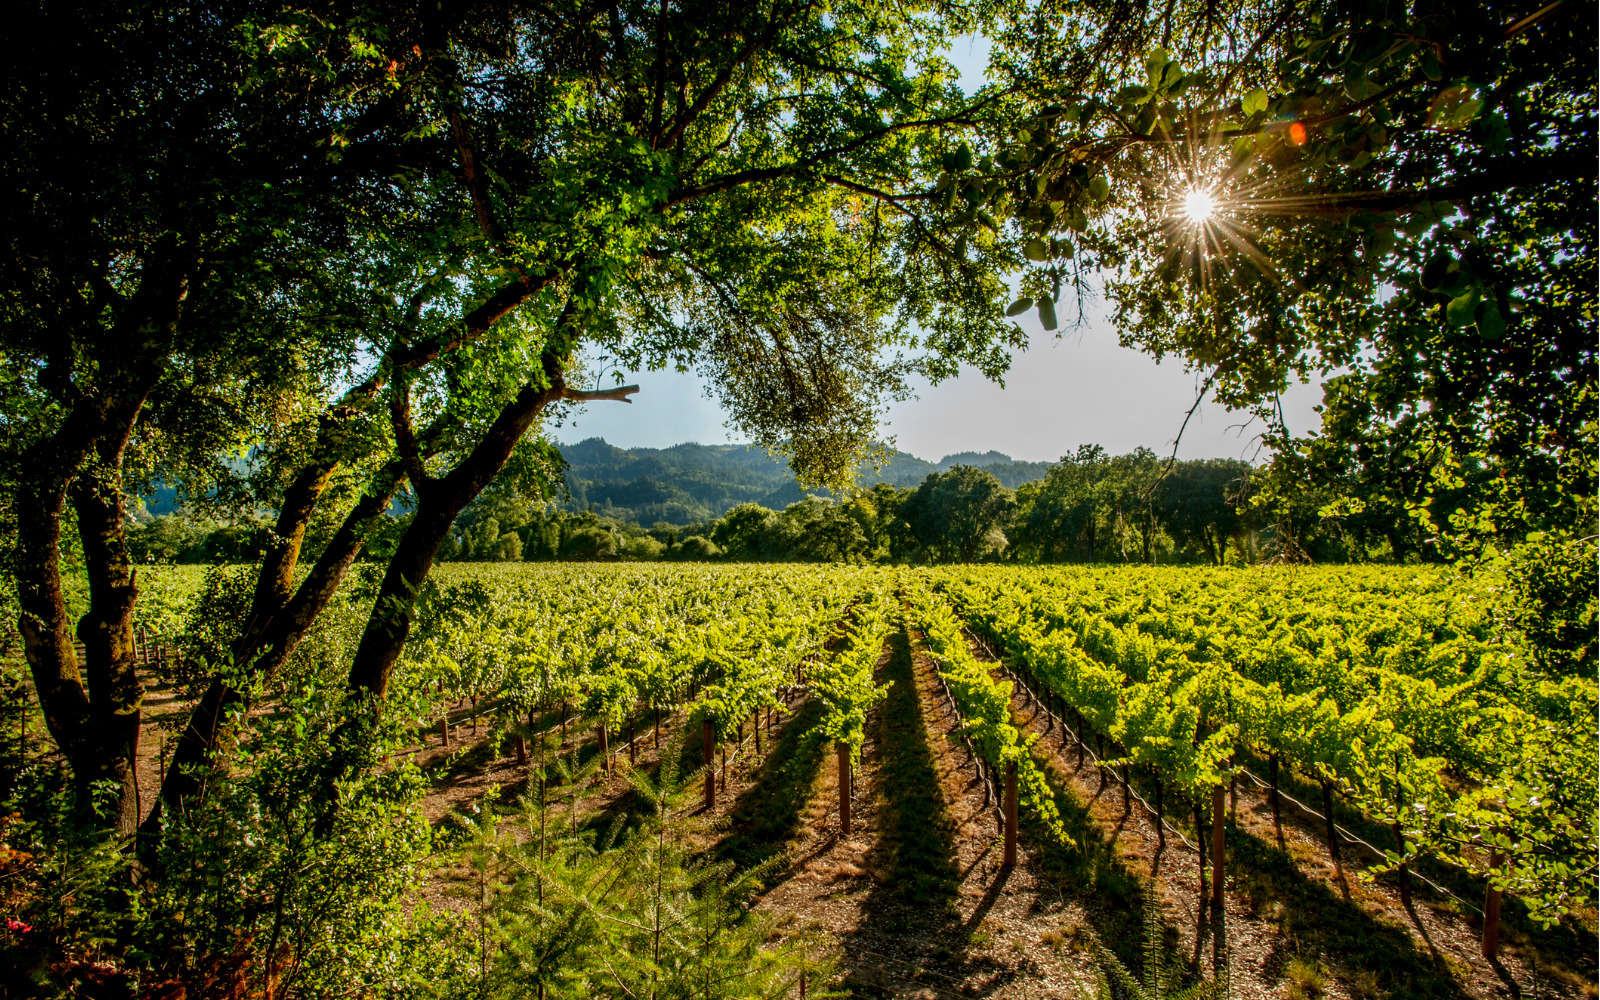 Trees surrounding a vineyard on a sunny day.